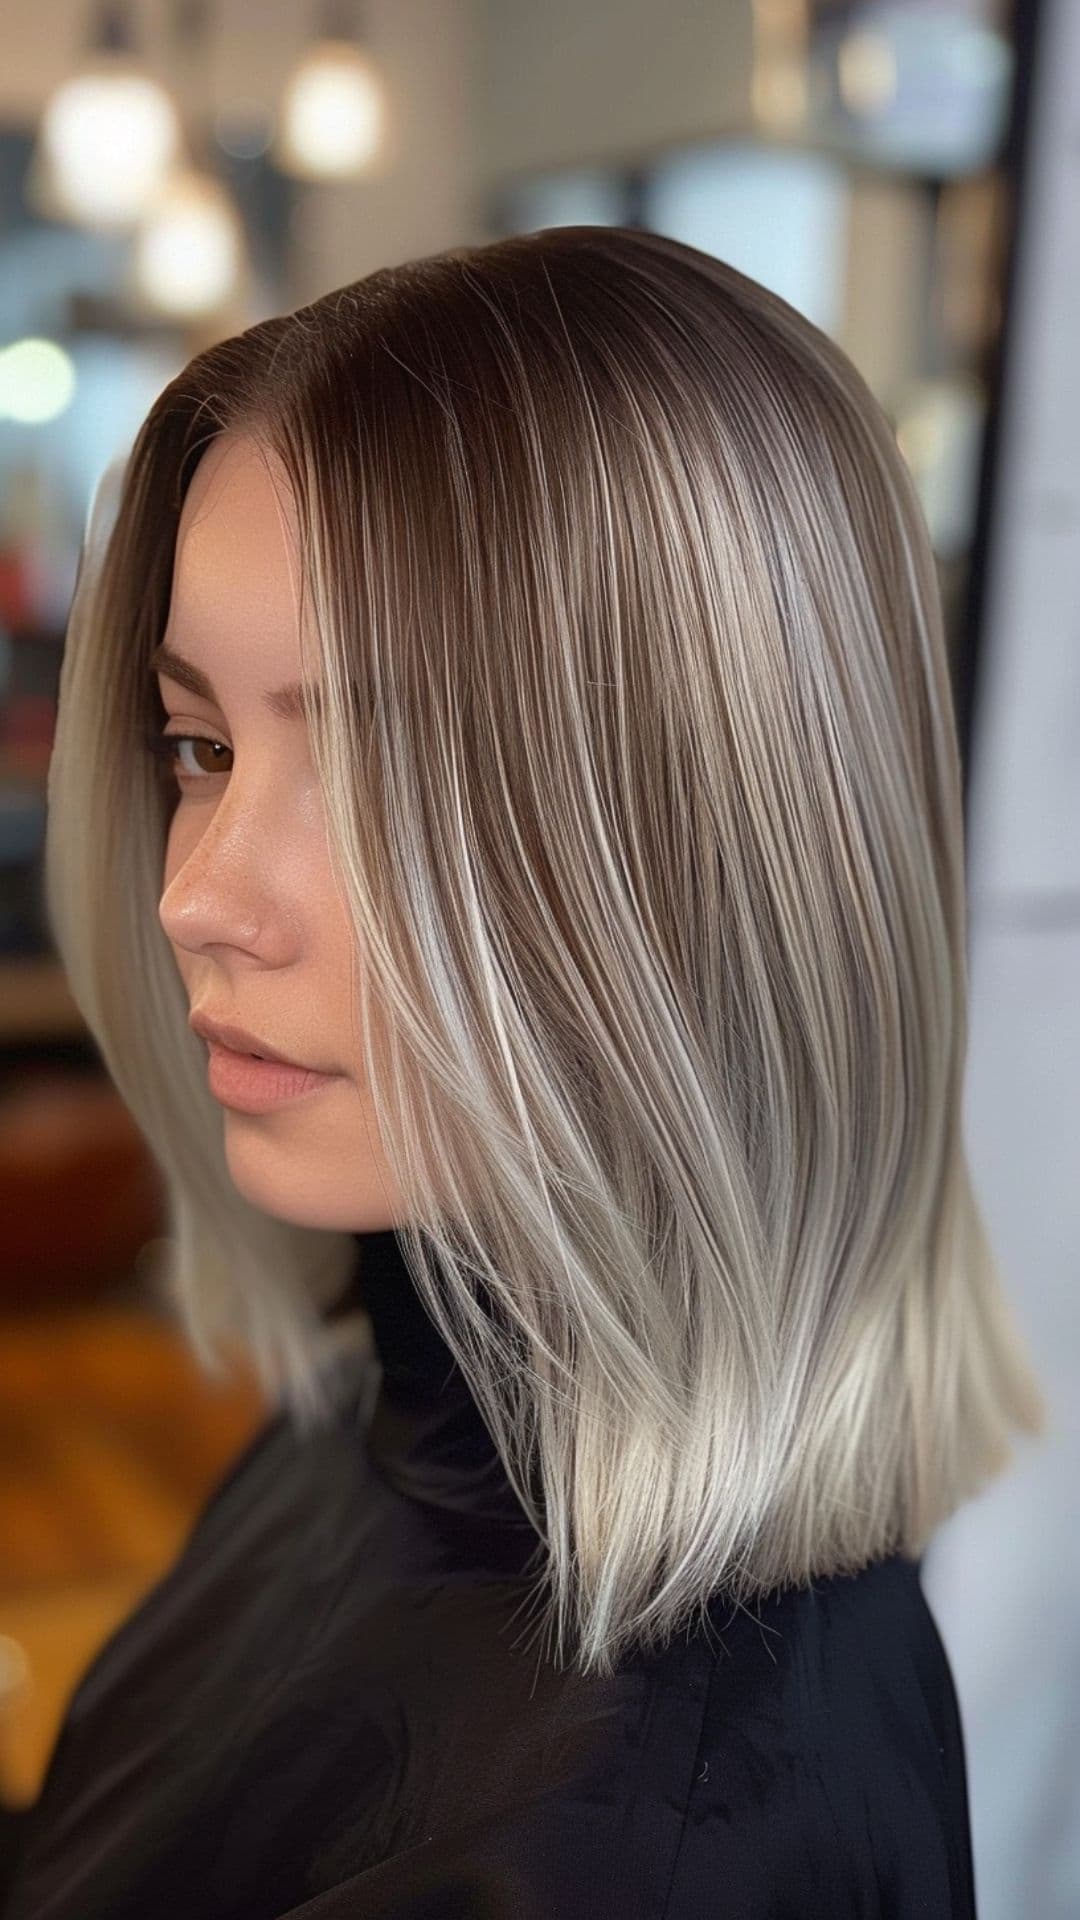 A woman modelling a silver ombre hair.